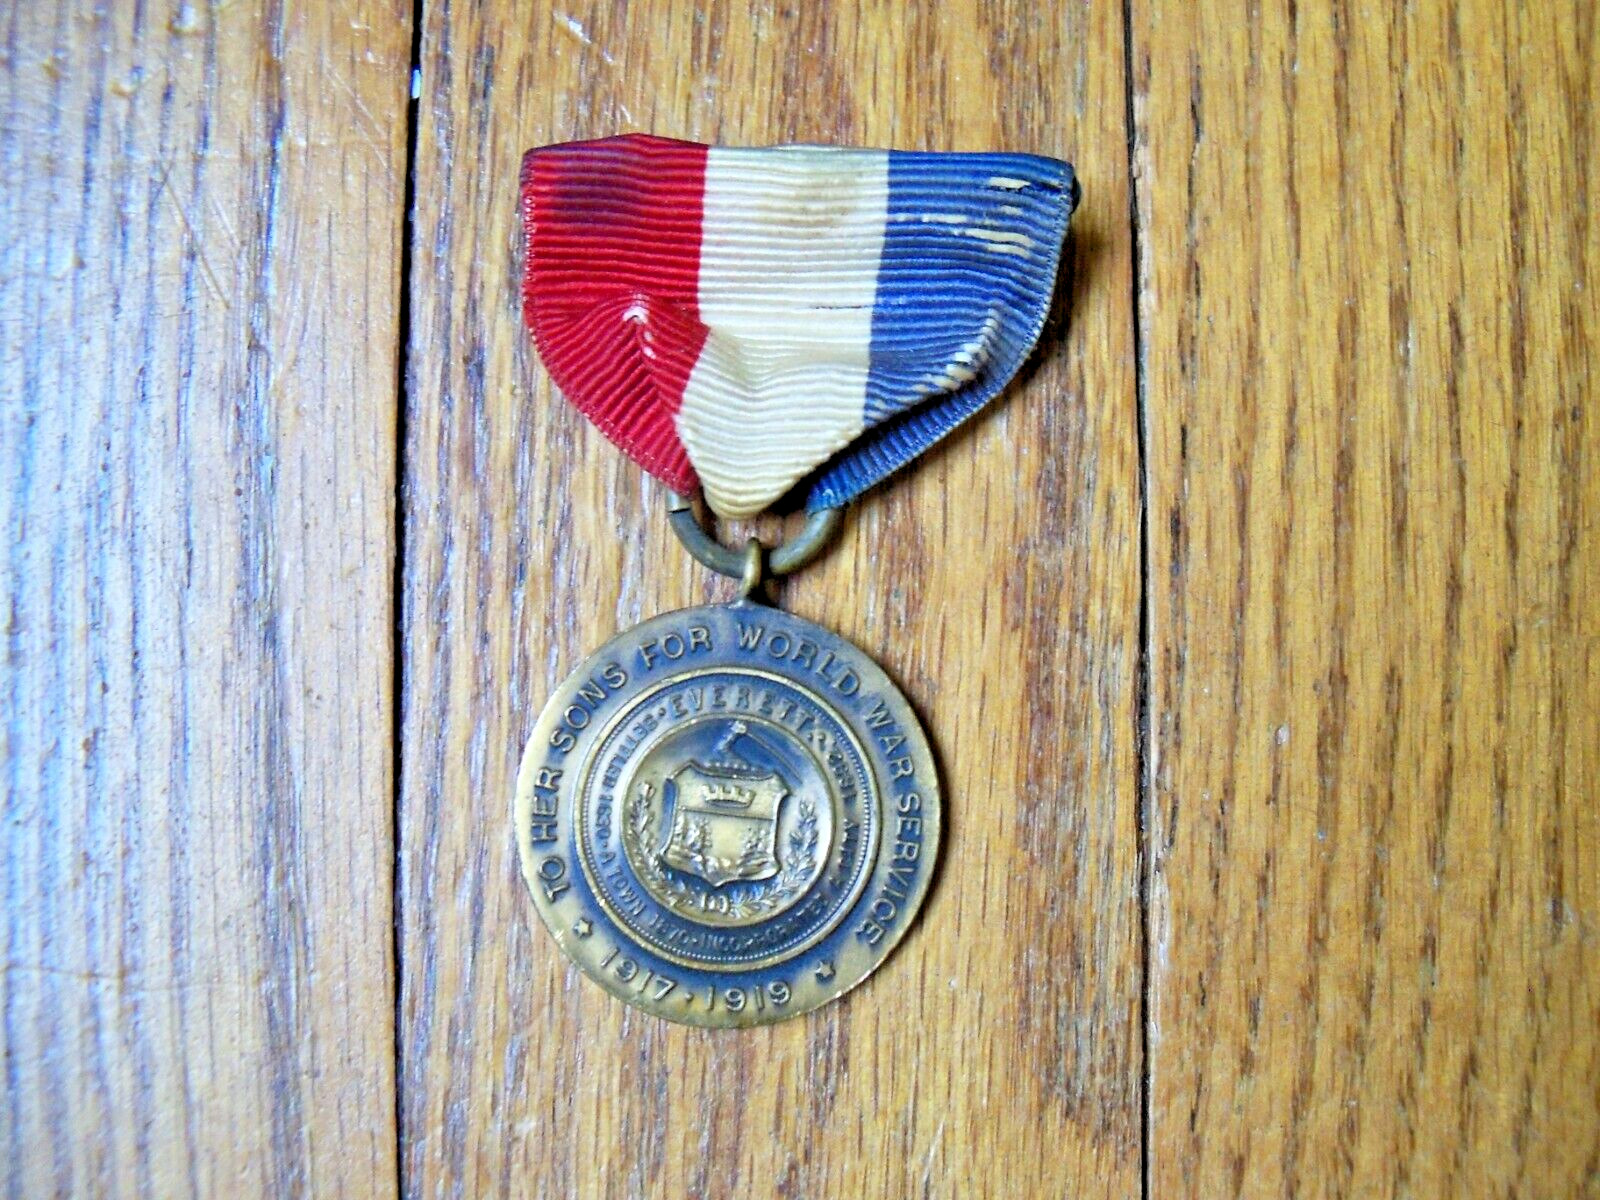 WWI WW1 WORLD WAR 1 SONS IN SERVICE TOKEN MEDAL US ARMY